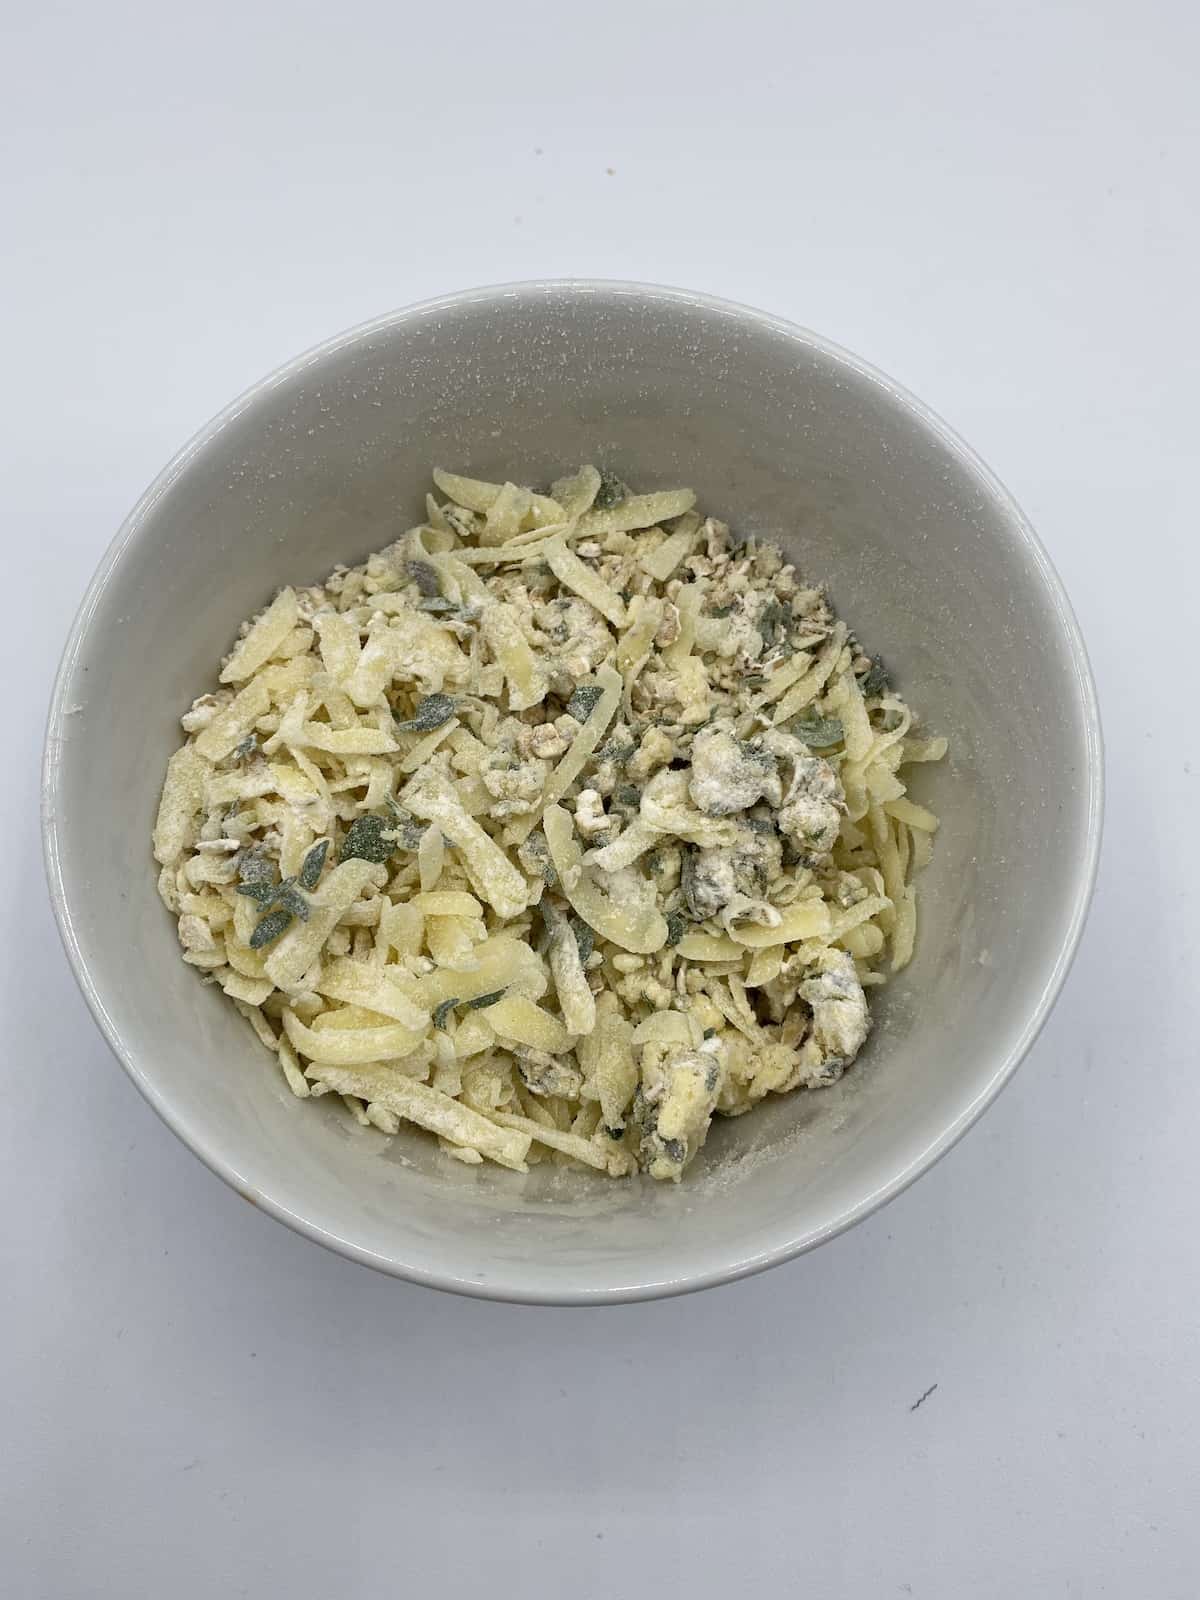 Cheese and Herb Mixture in a small white bowl.